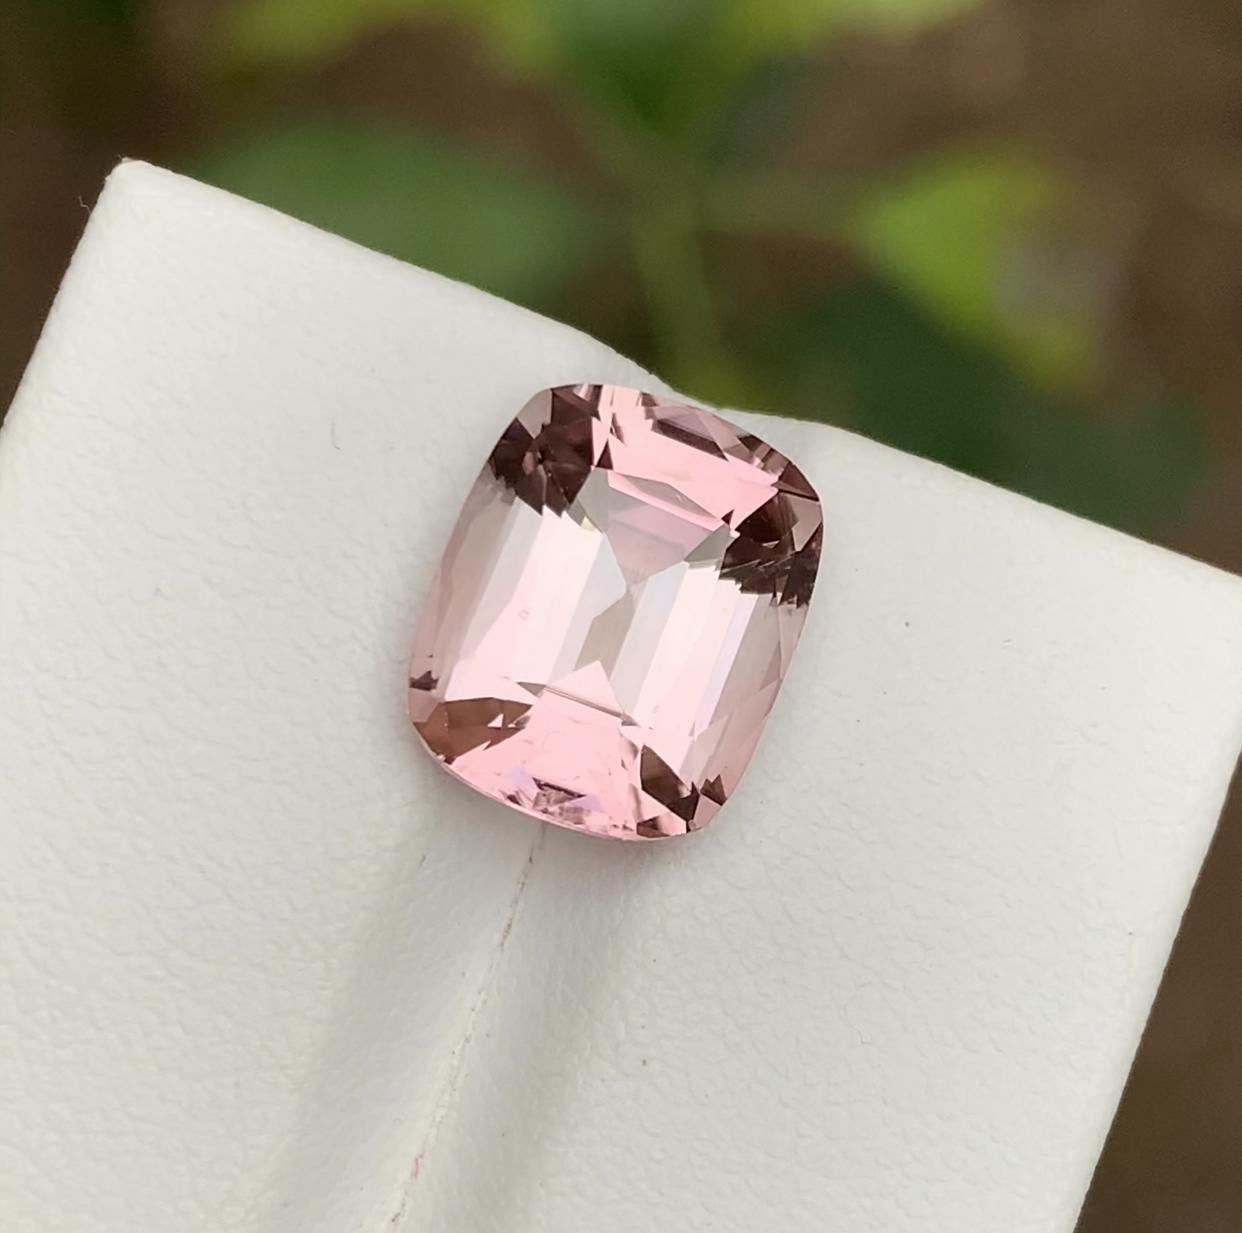 GEMSTONE TYPE: Tourmaline
PIECE(S): 1
WEIGHT: 5.70 Carat
SHAPE: Cushion 
SIZE (MM): 12.18 x 10.00 x 6.75
COLOR: Pink
CLARITY: Eye Clean
TREATMENT: None
ORIGIN: Afghanistan
CERTIFICATE: On demand

This stunning pink tourmaline gemstone boasts a